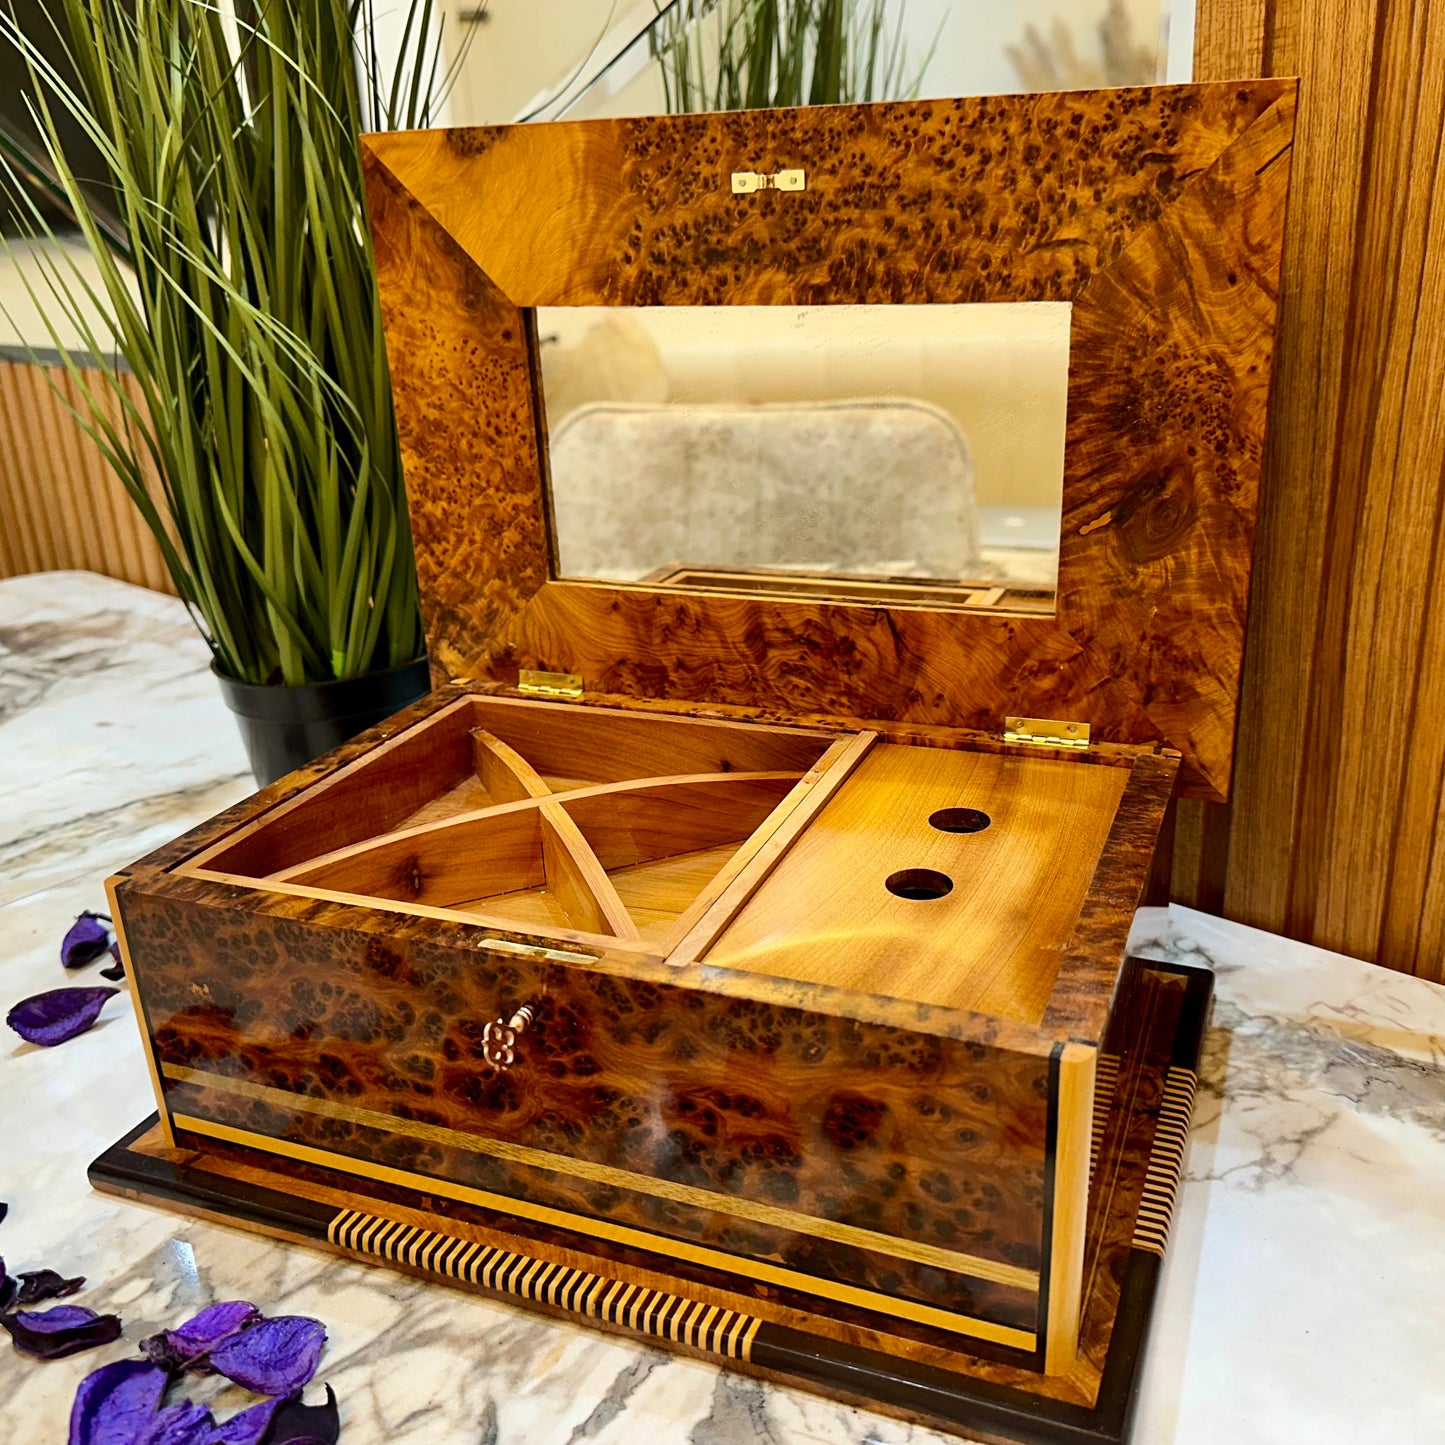 13"x8" Luxury Moroccan Royal jewellery burl wooden box inlaid with mother of pearl,lockable handmade gift box for anniversary,mirror inside